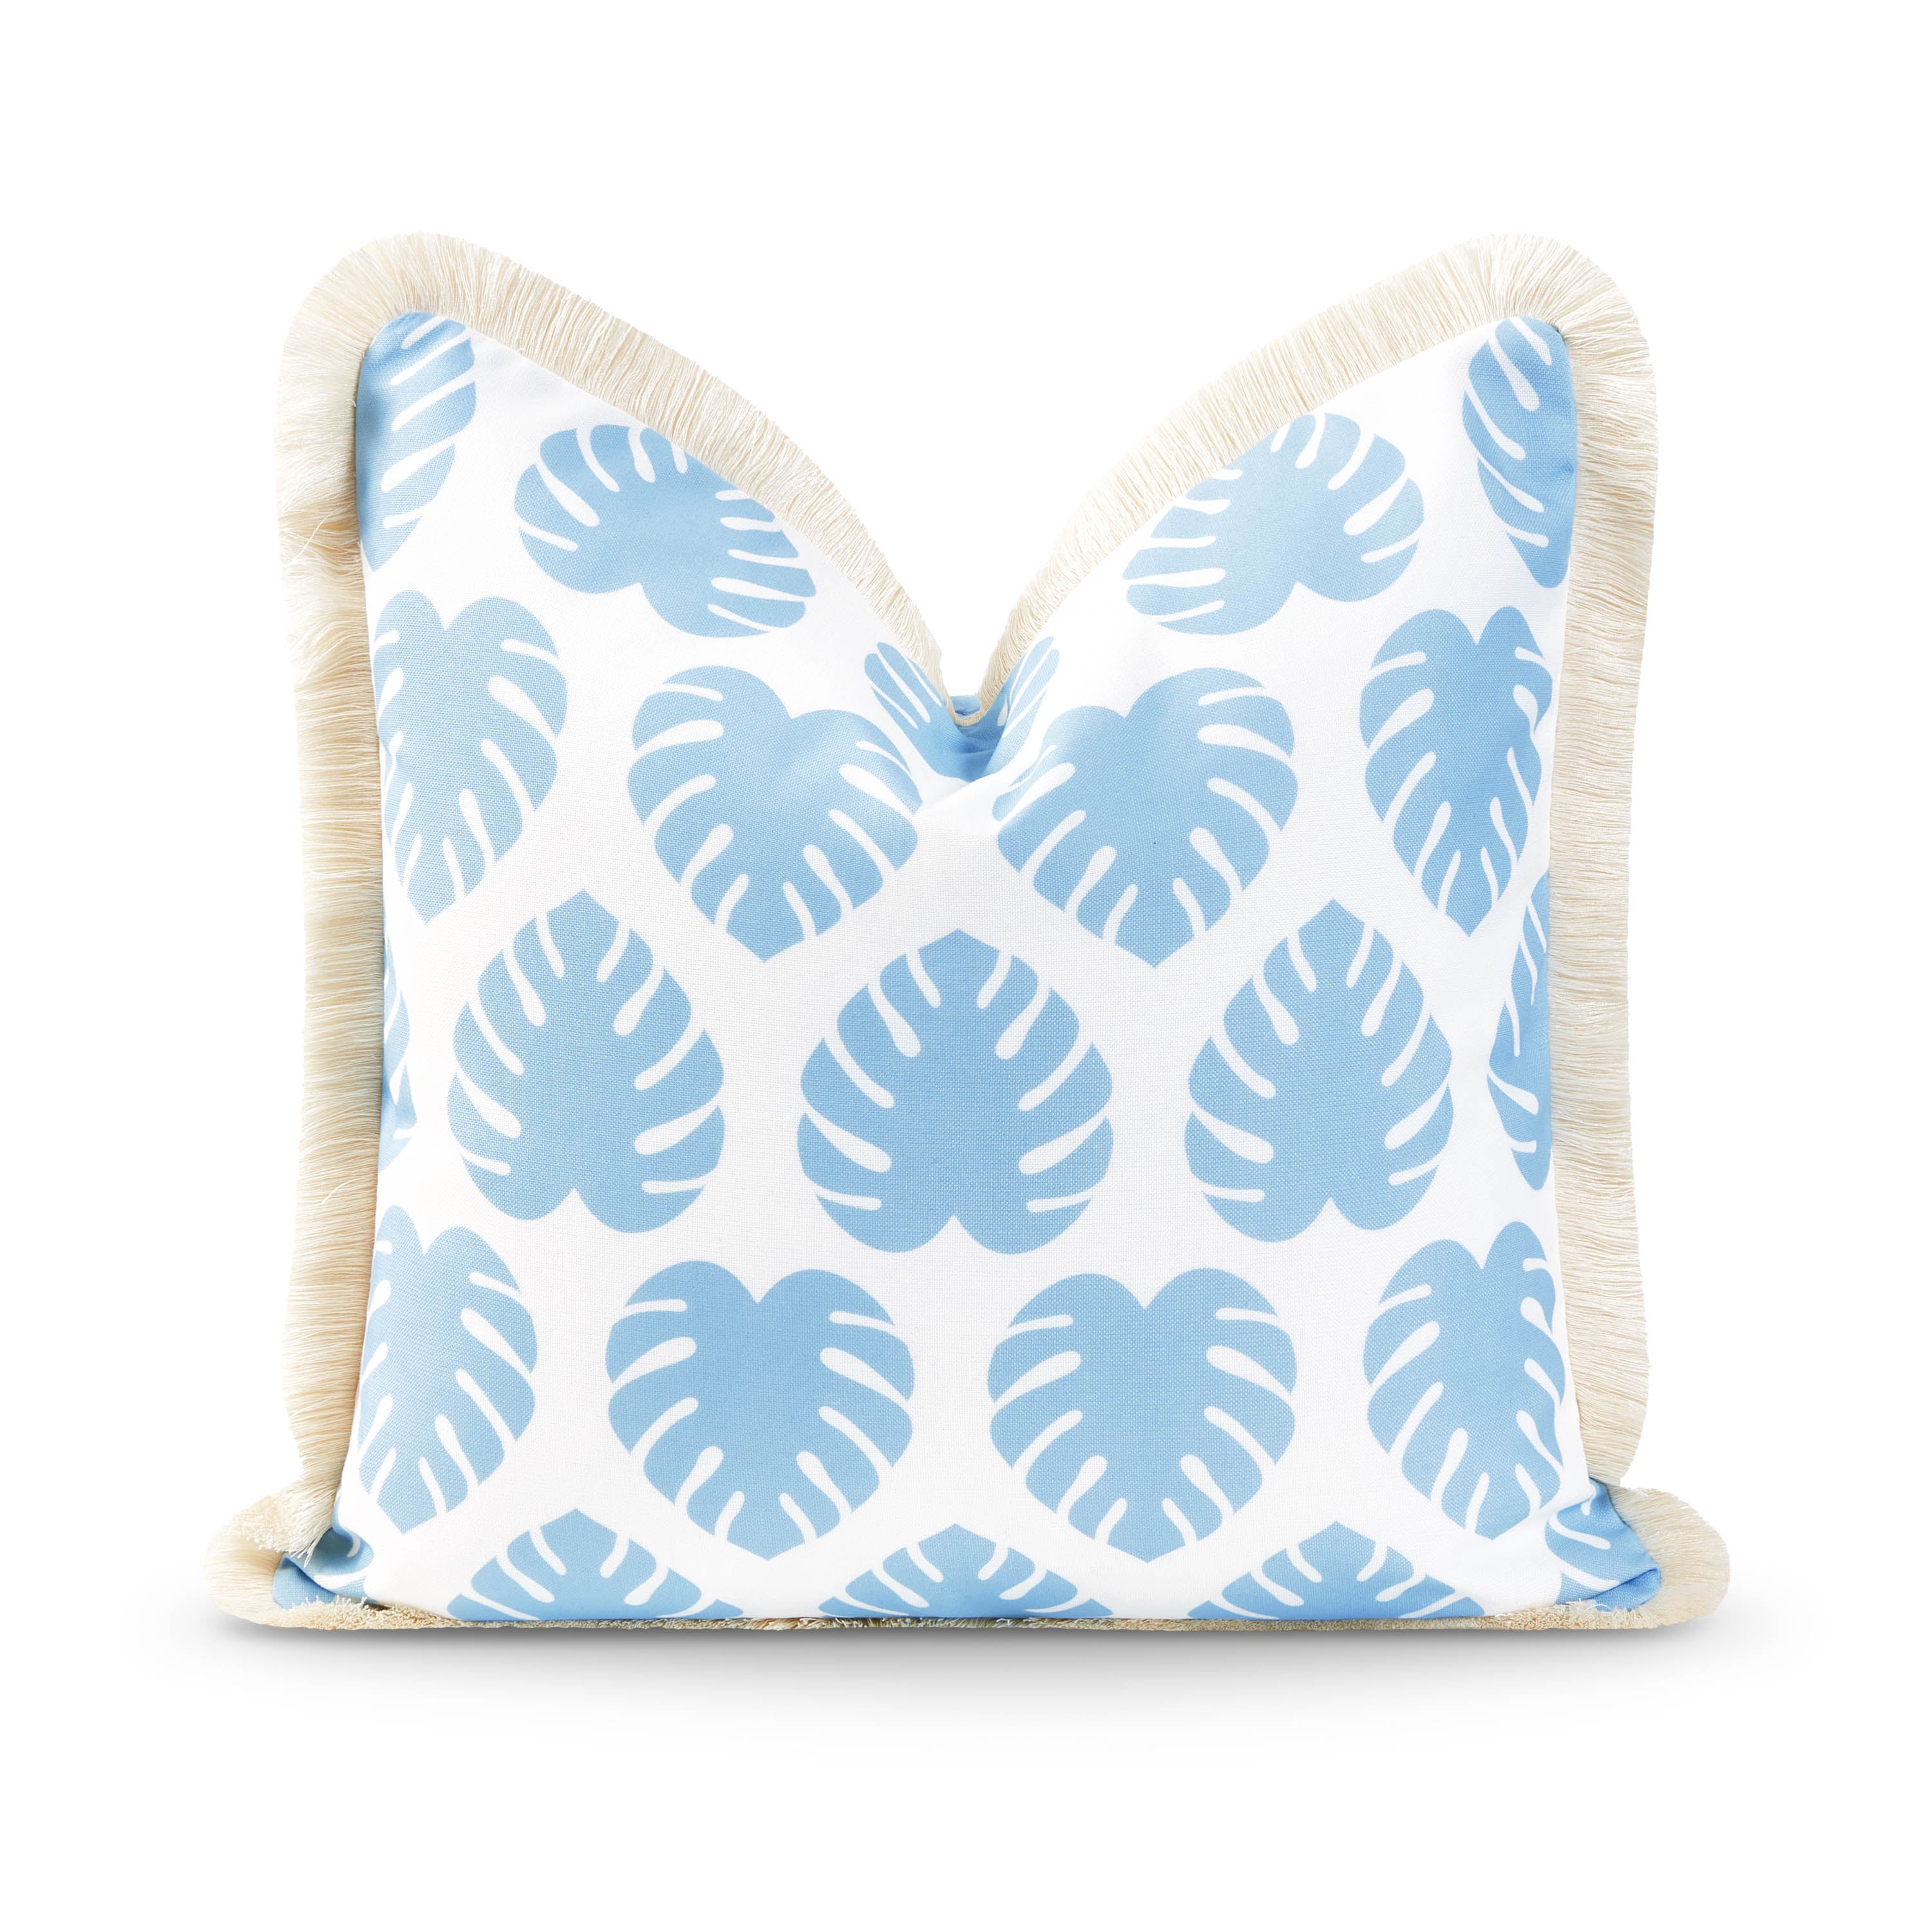 Coastal Hampton Style Indoor Outdoor Pillow Cover, Monstera Leaf Fringe, Baby Blue, 20"x20"-0